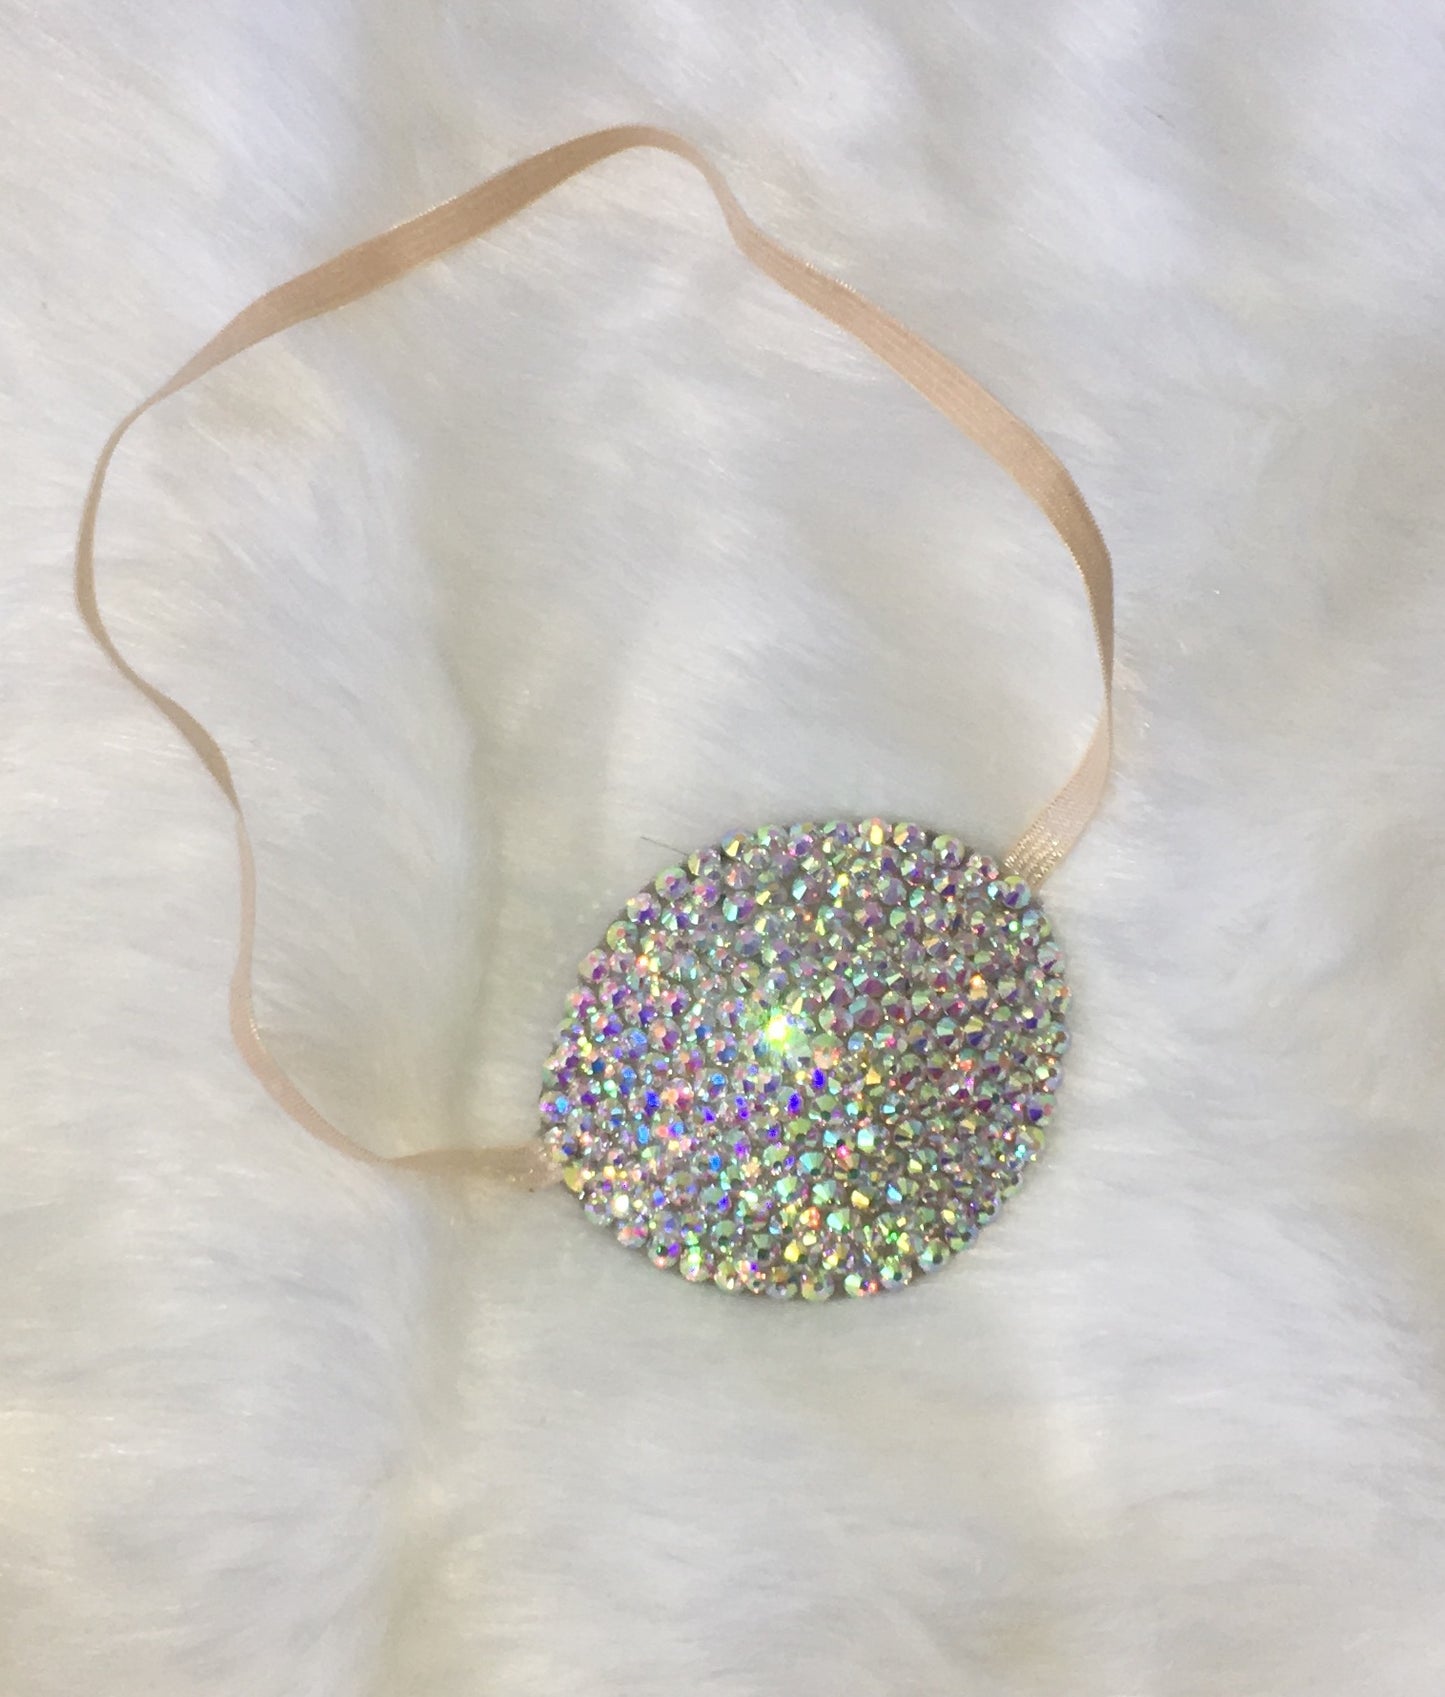 Nude/Skintone AB Crystal Bedazzled Eye Patch